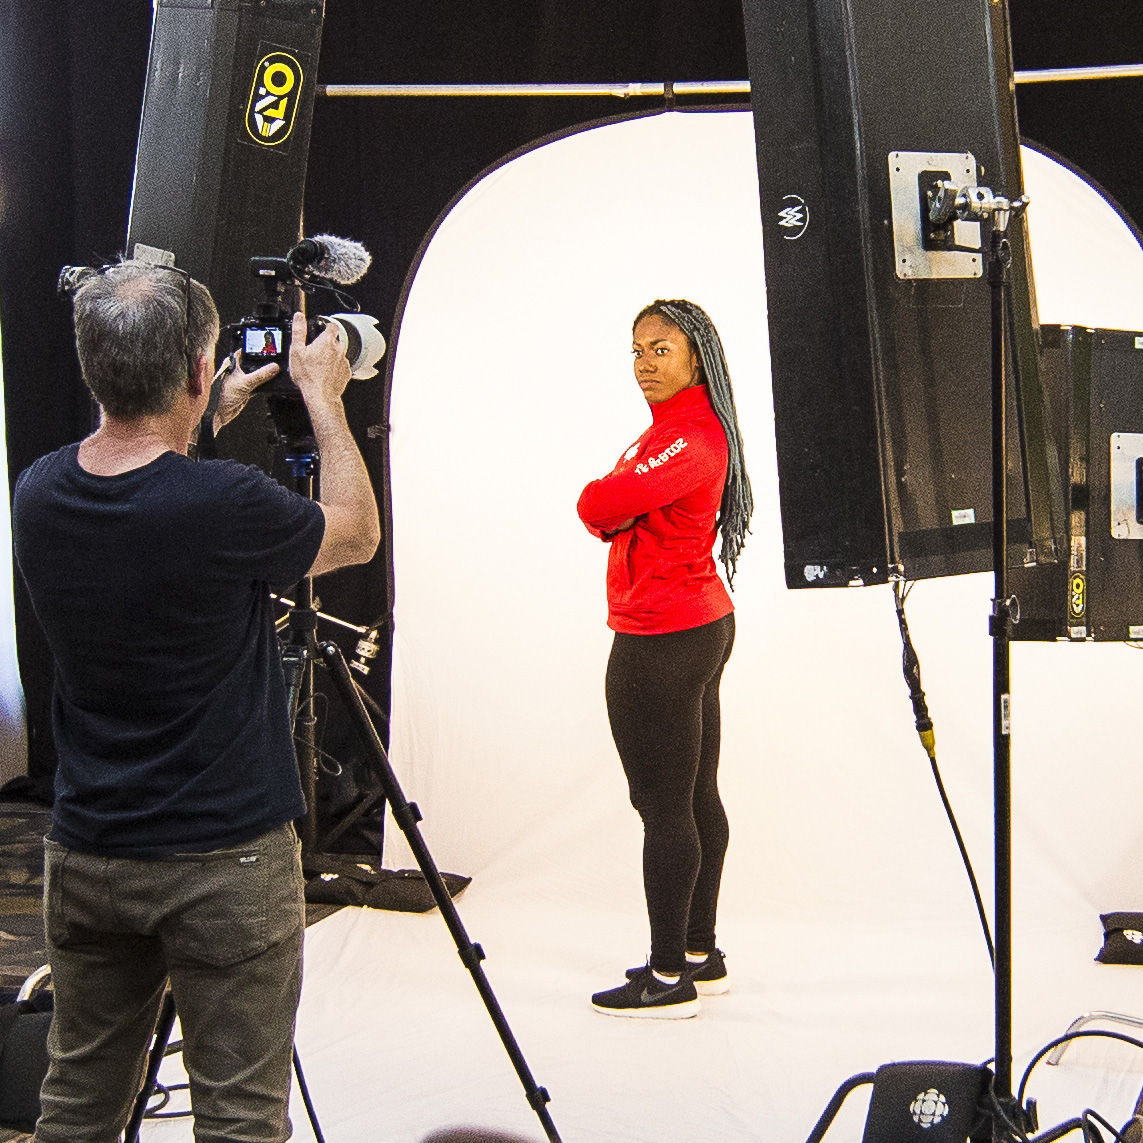 Female olympian is posing for a headshot photo